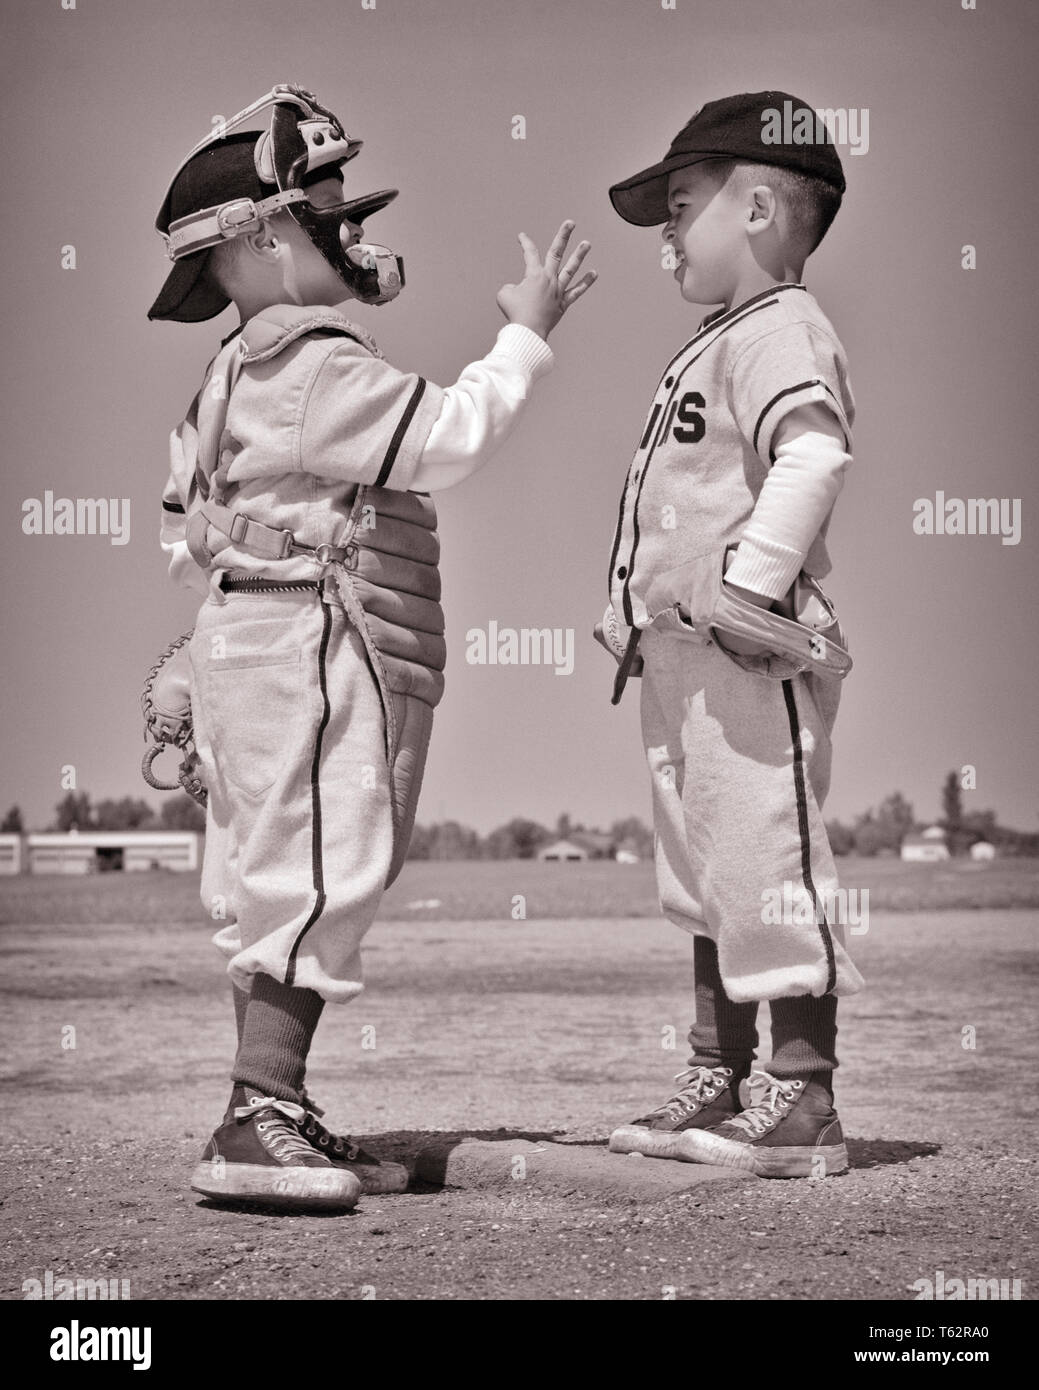 1960s TWO BOYS PITCHER AND CATCHER IN LITTLE LEague baseball uniforms having a conversation on the pitcher’s mound  - b14306 HAR001 HARS B&W PITCHER CATCHER RECREATION MOUND DIRECTION ON THE ATHLETES BALL GAME BALL SPORT COOPERATION GROWTH JUVENILES TOGETHERNESS BASEBALL BAT BLACK AND WHITE CAUCASIAN ETHNICITY HAR001 OLD FASHIONED Stock Photo